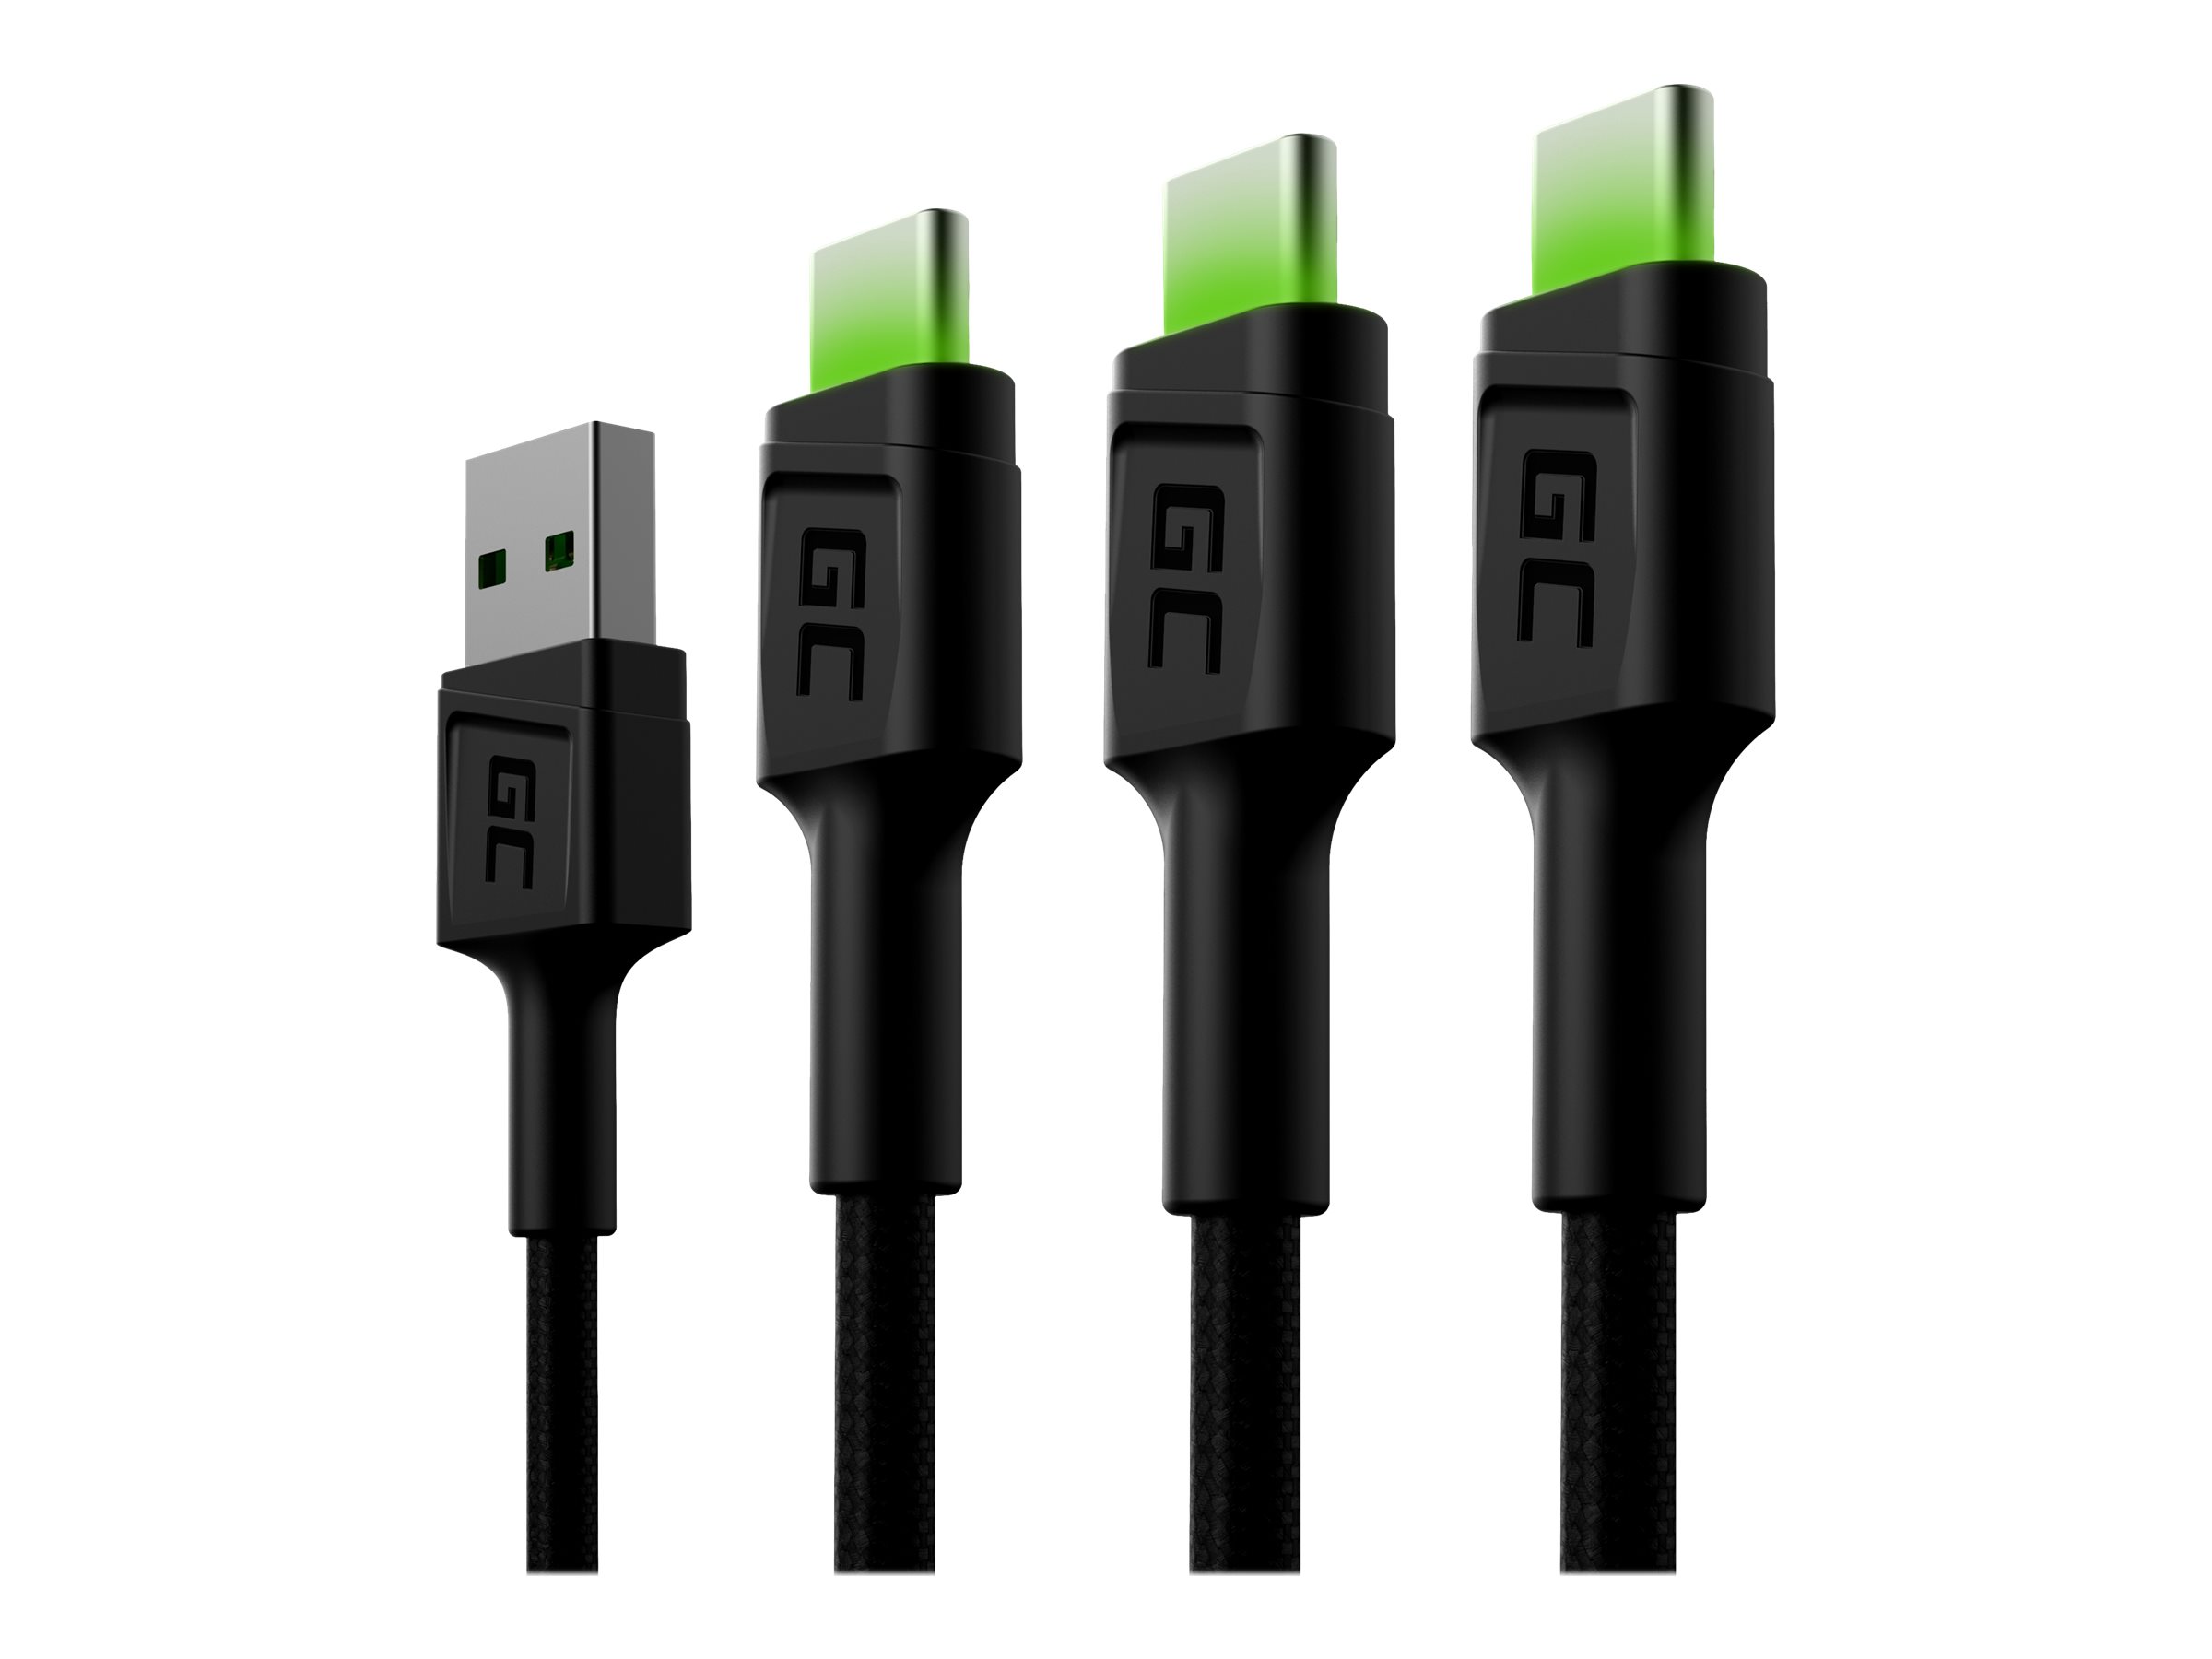 GREENCELL 3x Cable GC Ray USB-C 120cm green LED backlight Ultra Charge QC 3.0